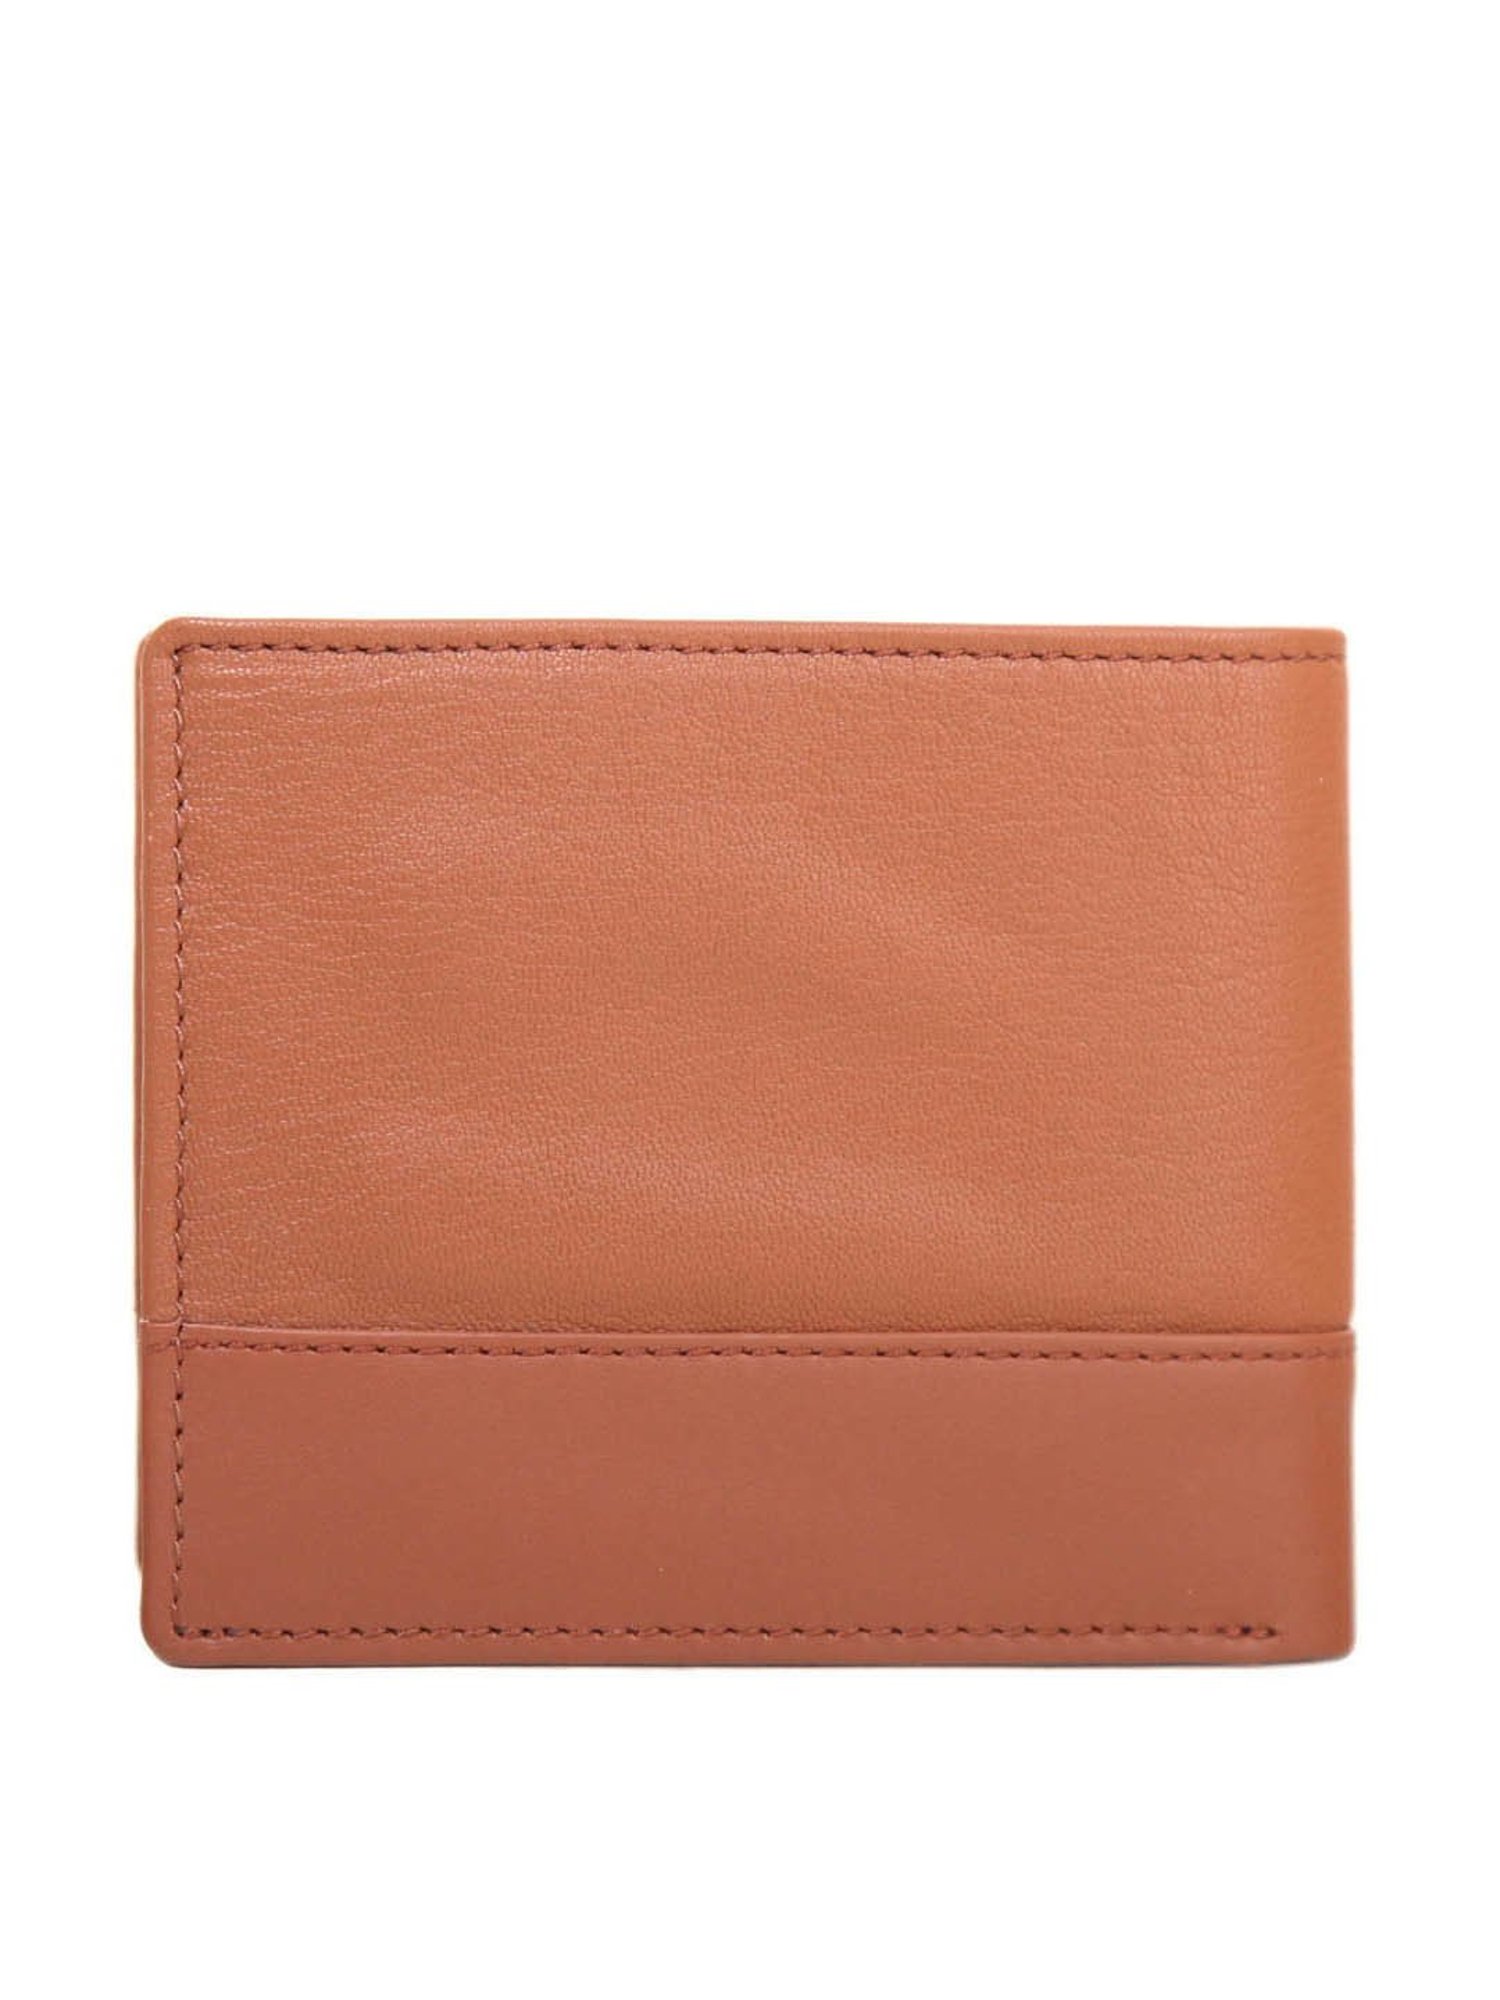 Buy Woodland Wallet online from Mr.Classy